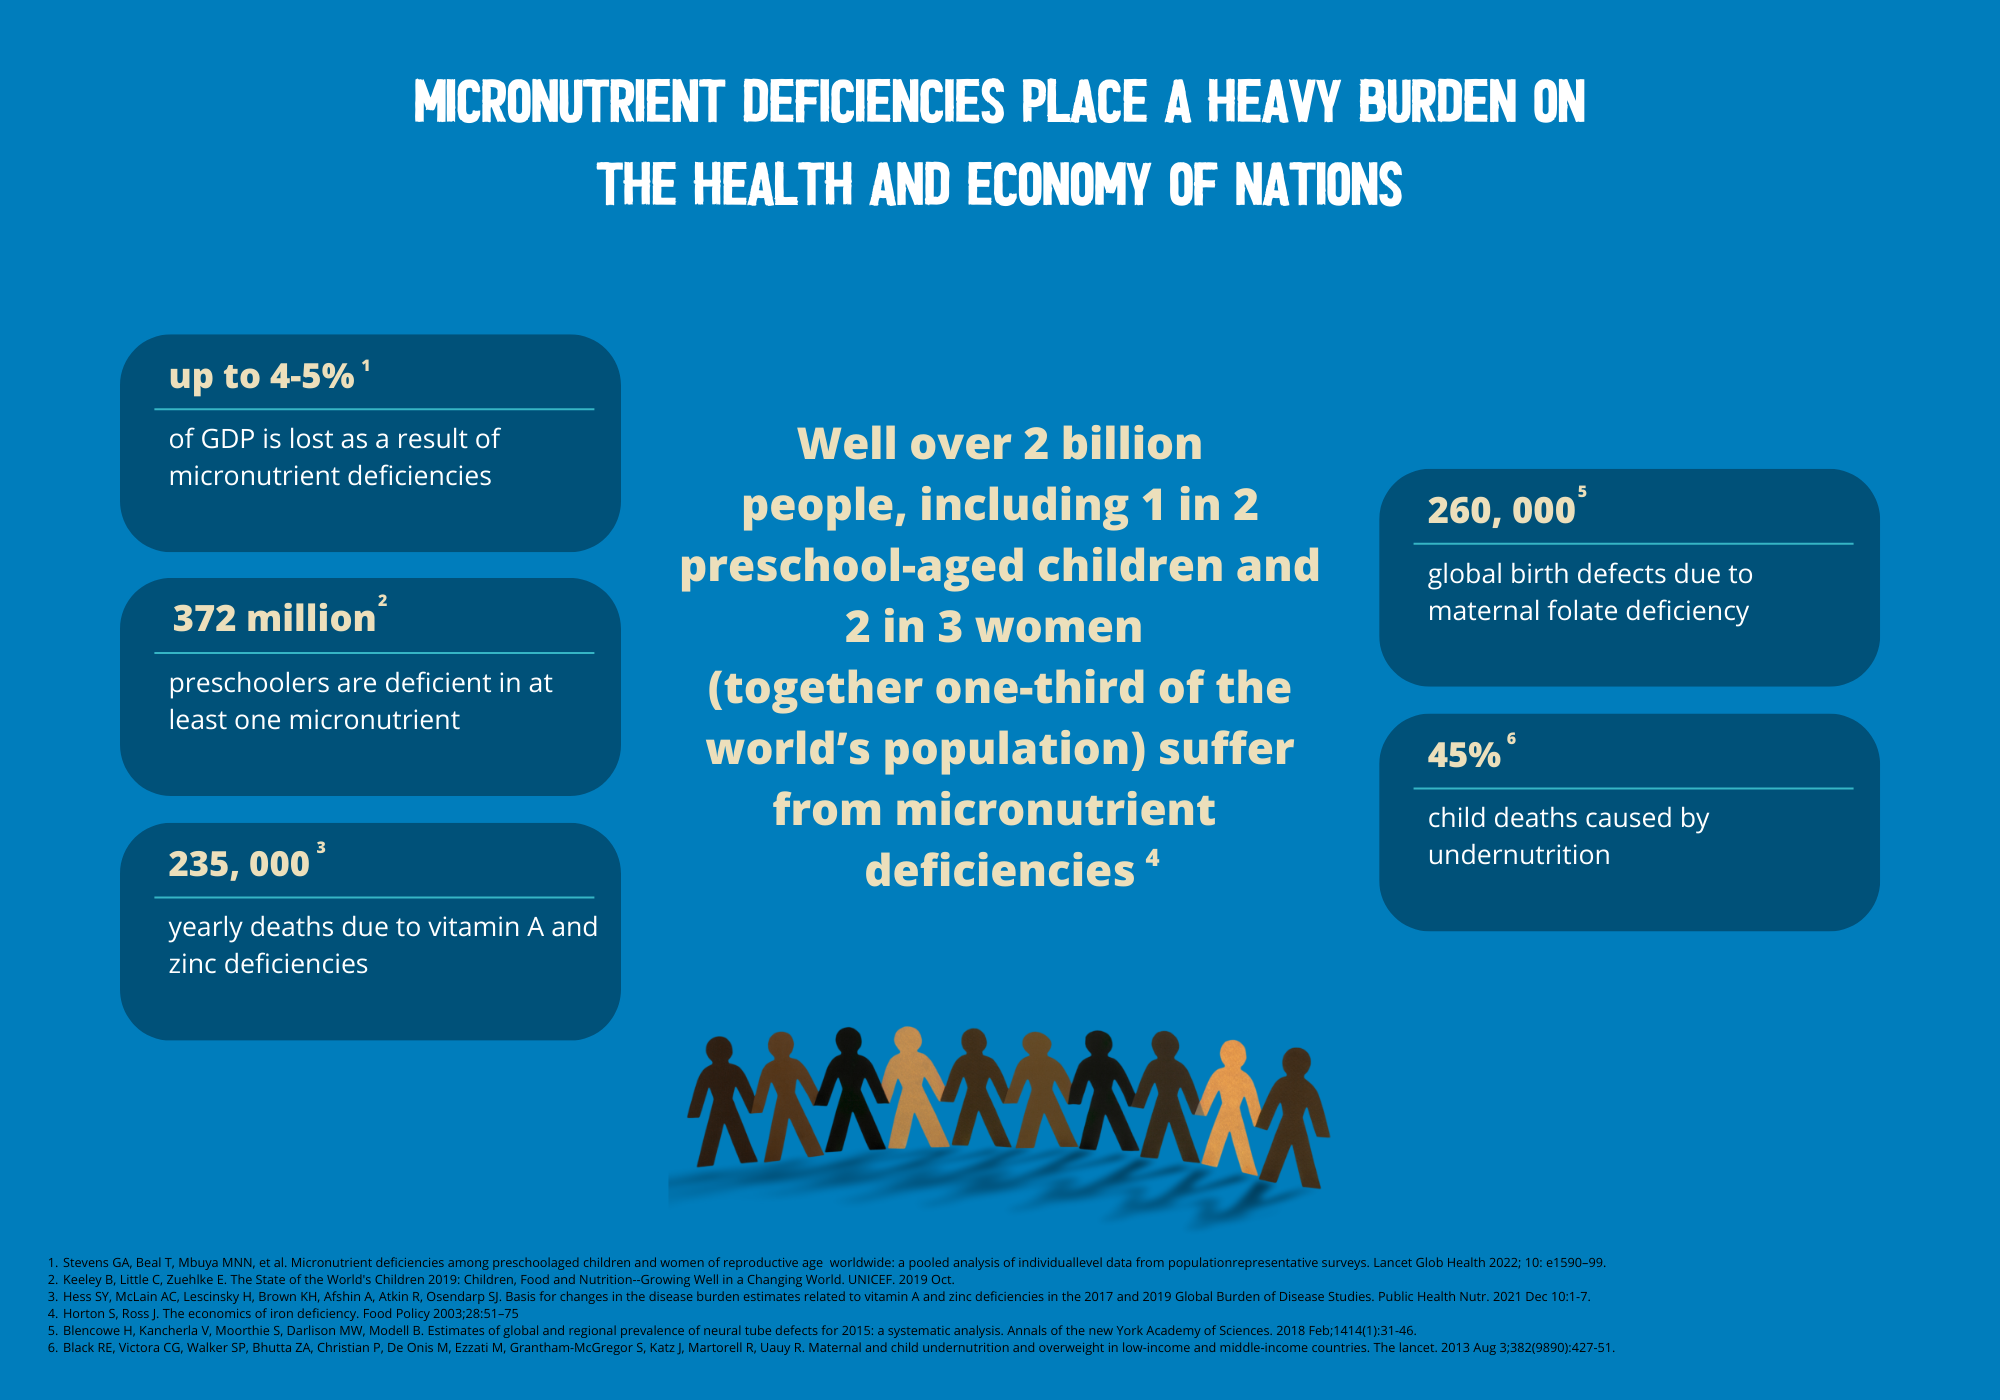 Micronutrient deficiencies place a heavy burden on the health and economy of nations-3